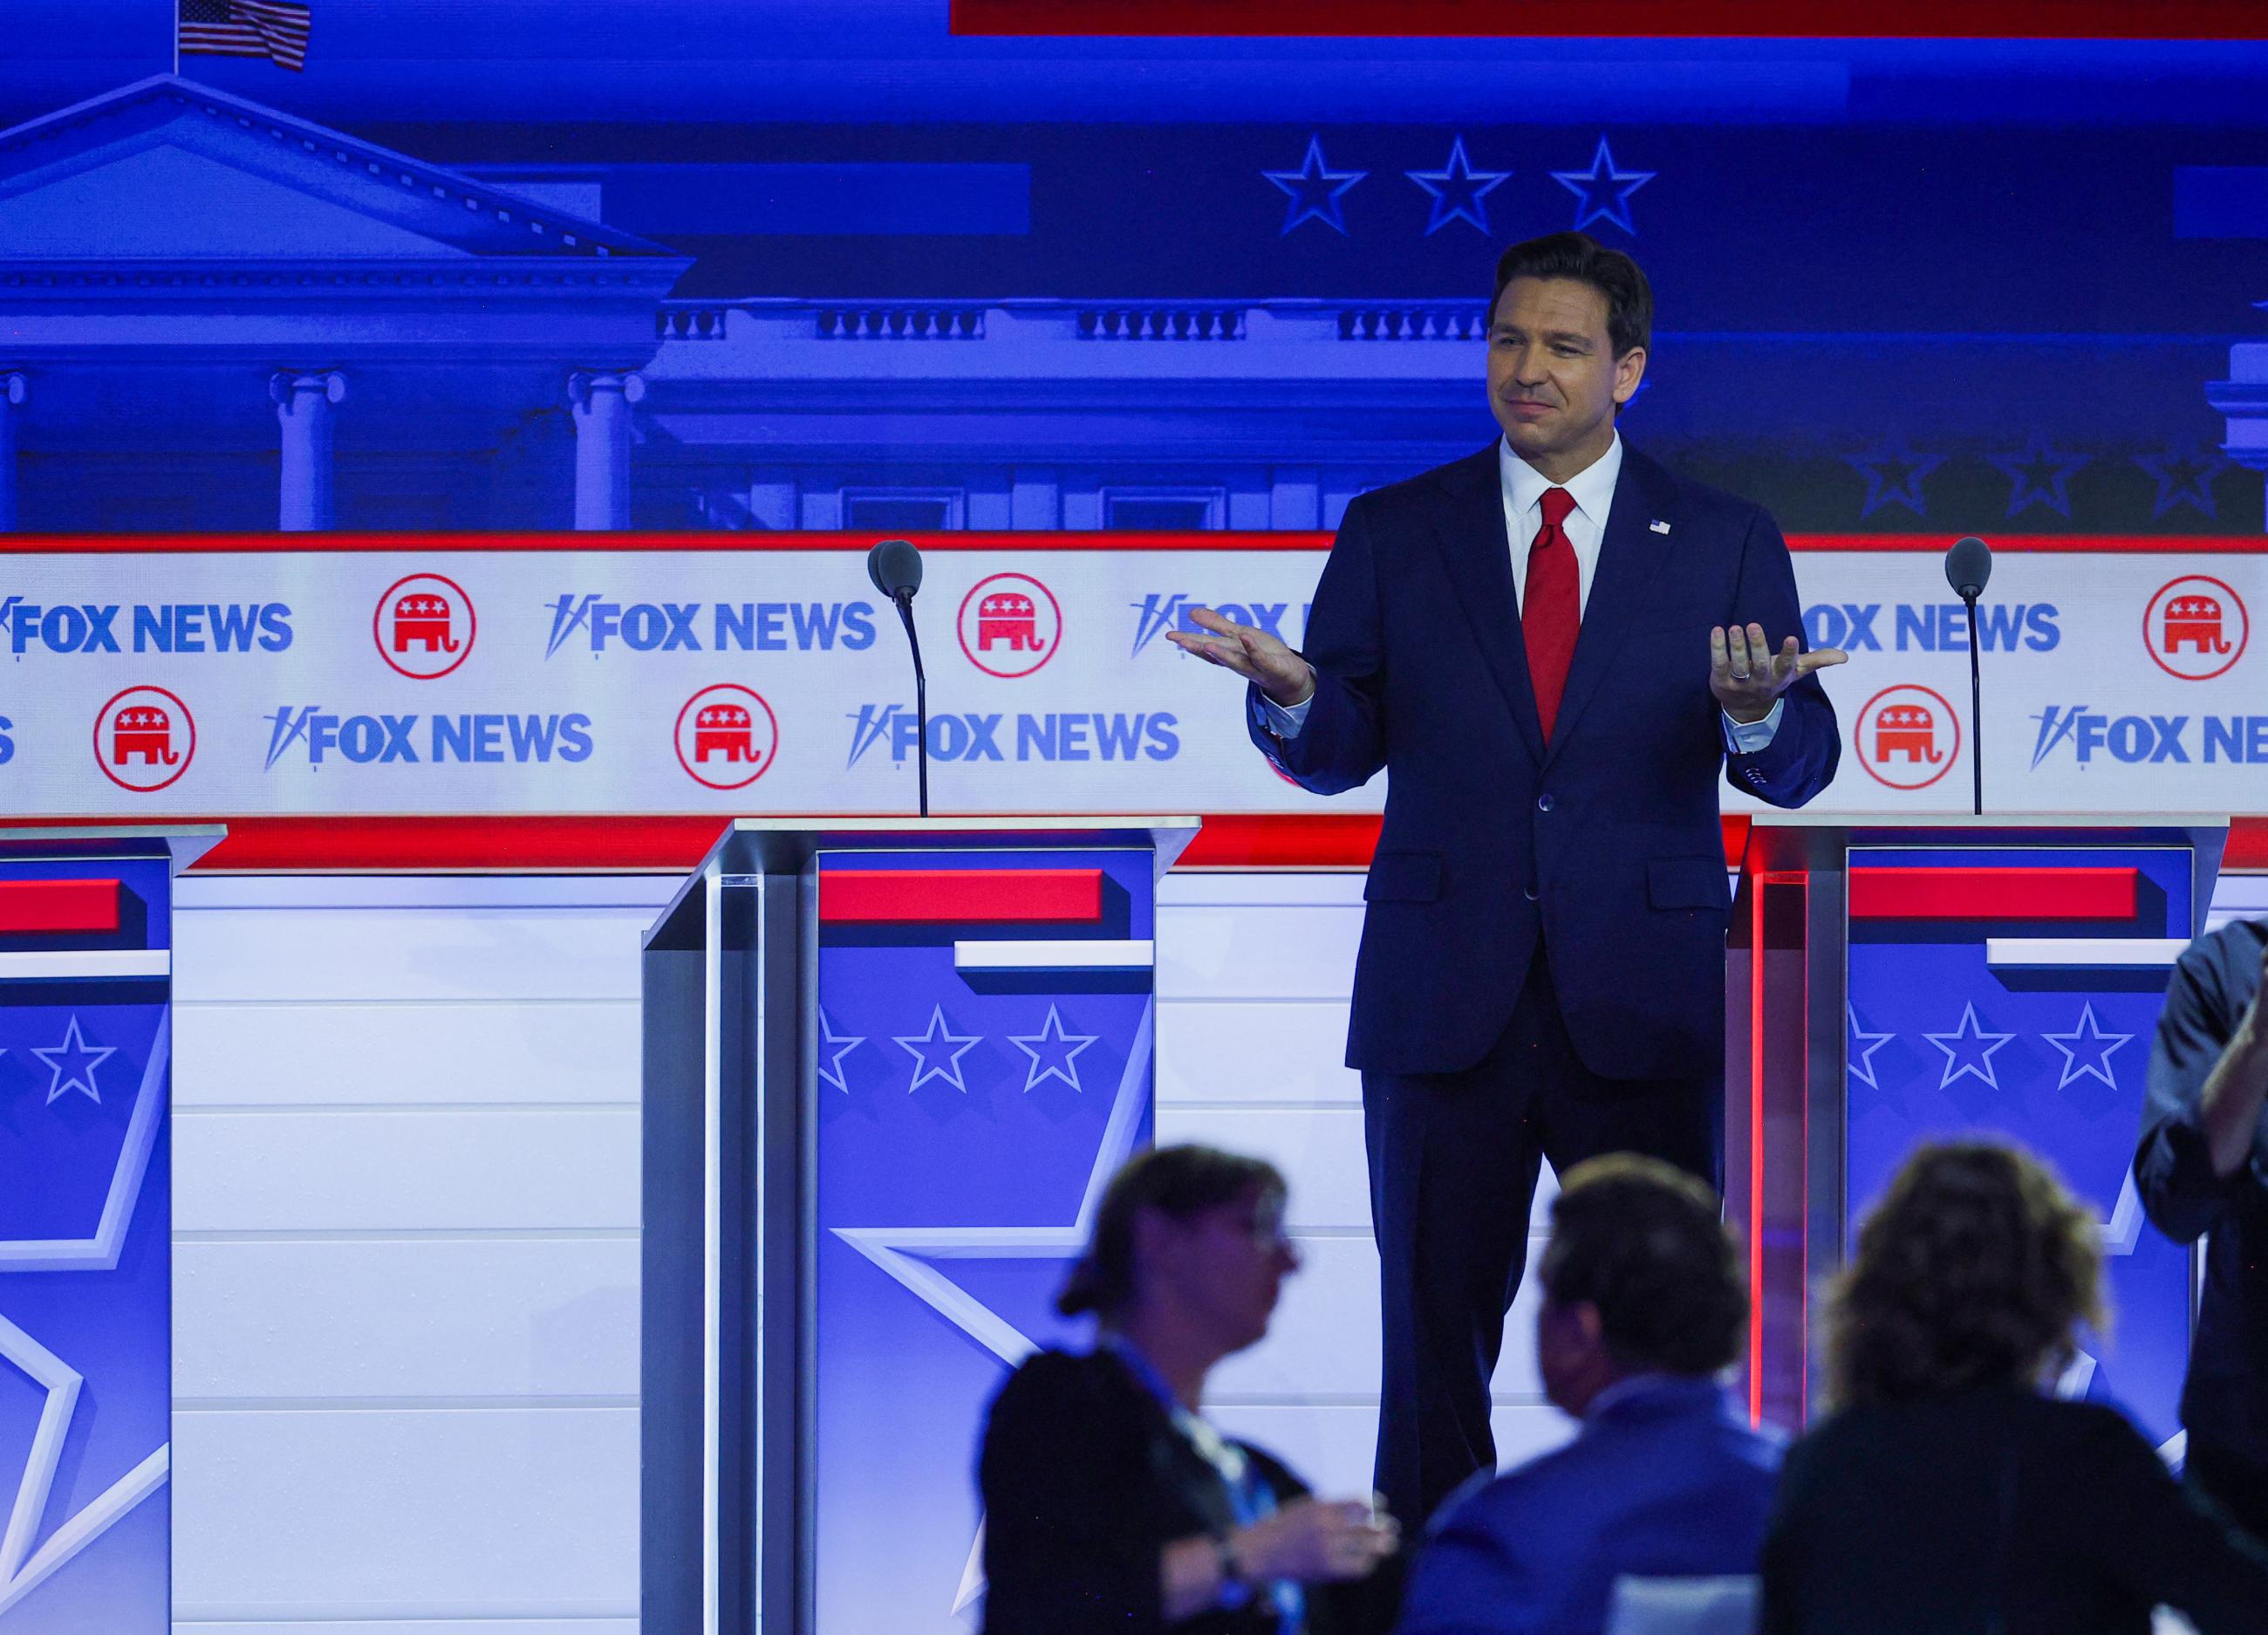 Republican presidential candidate and Florida Governor Ron DeSantis gestures towards the crowd during a commercial break at the first Republican candidates' debate of the 2024 U.S. presidential campaign in Milwaukee, Wisconsin, U.S. August 23, 2023.